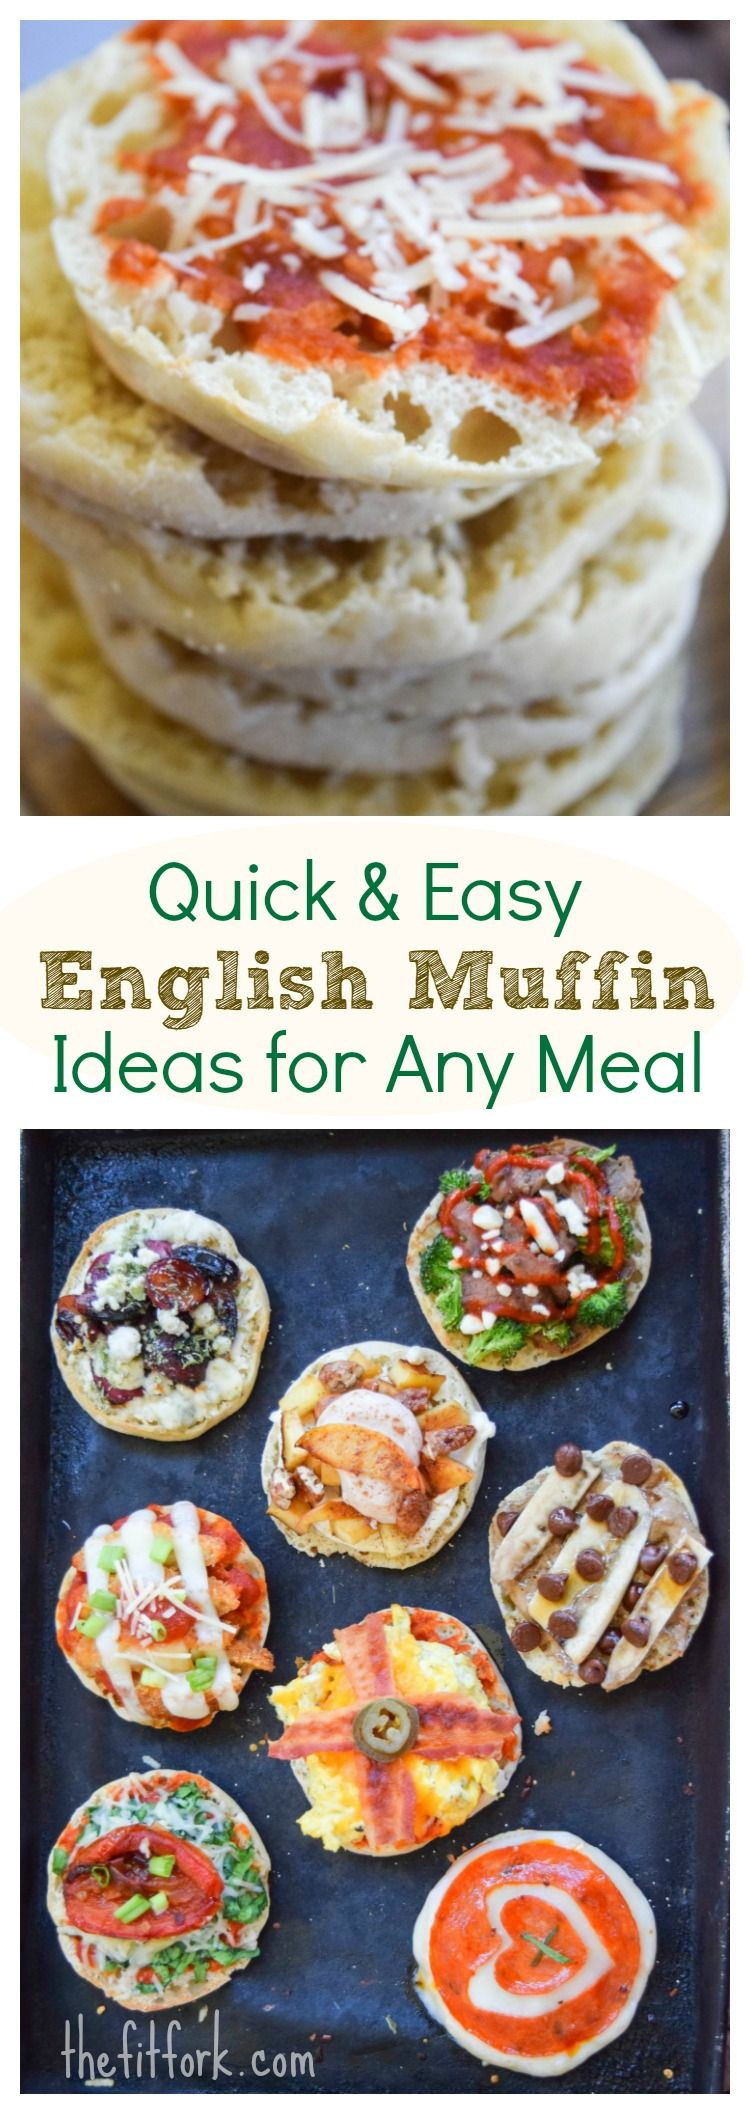 Toaster Oven Recipes For Kids
 How to Top an English Muffin Ideas for Any Meal